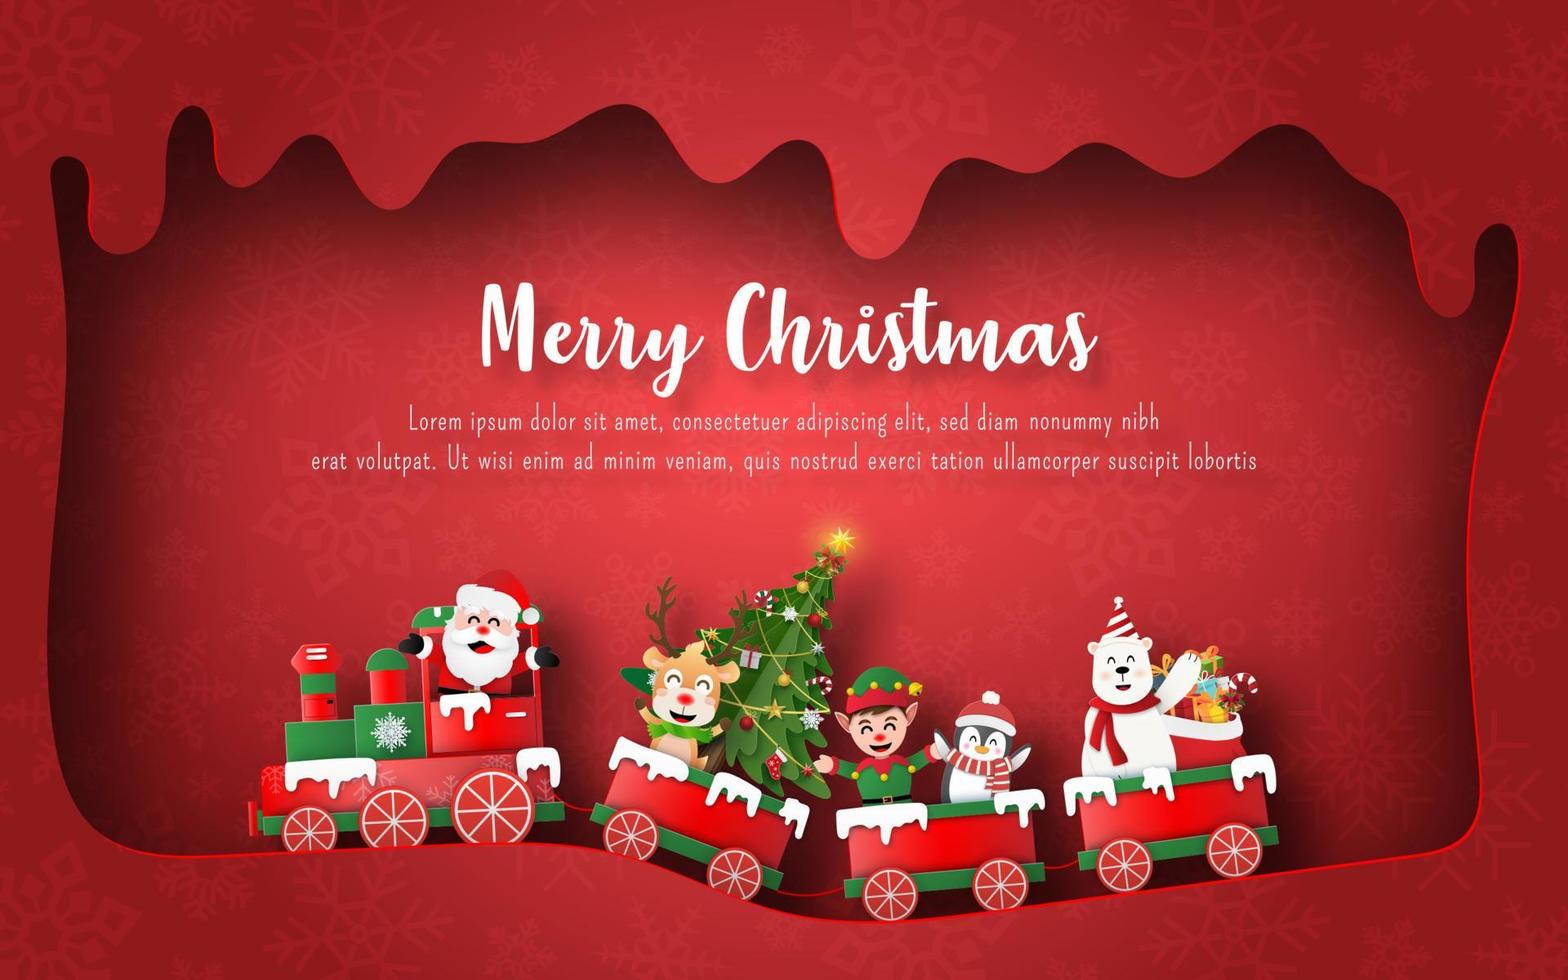 Origami Paper art of Santa Claus and friends on Christmas train, Postcard banner background vector